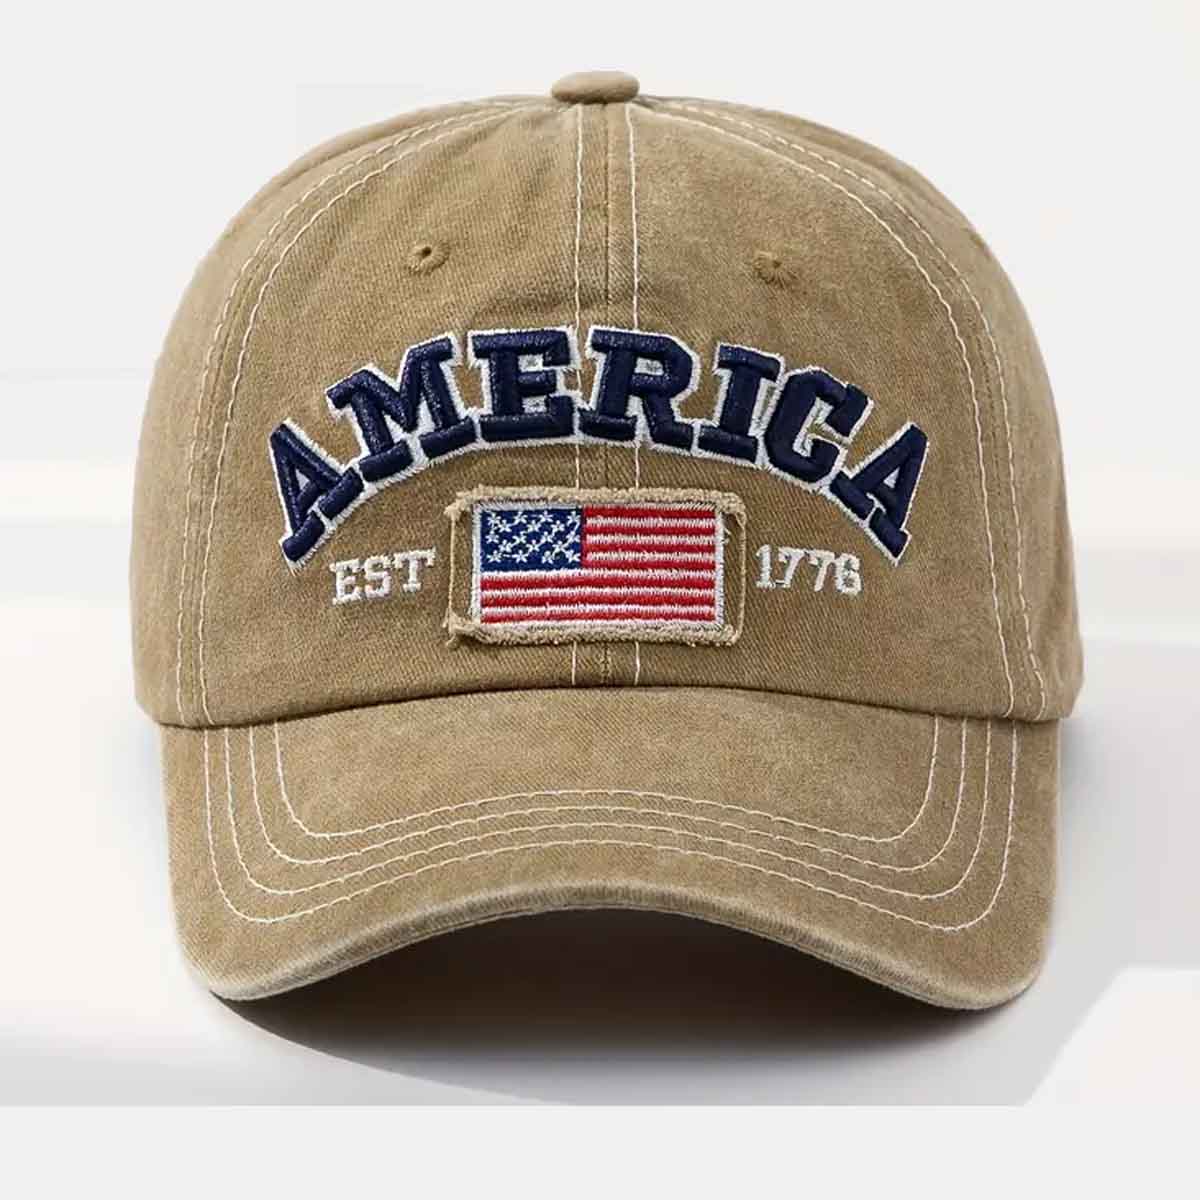 Legend since 1776 USA embroidered Cotton Vintage Washed Distressed Adjustable Khaki Baseball Cap. American Outfitters Patriot Apparel. The American Clothing Company. Patriot Gear USA.